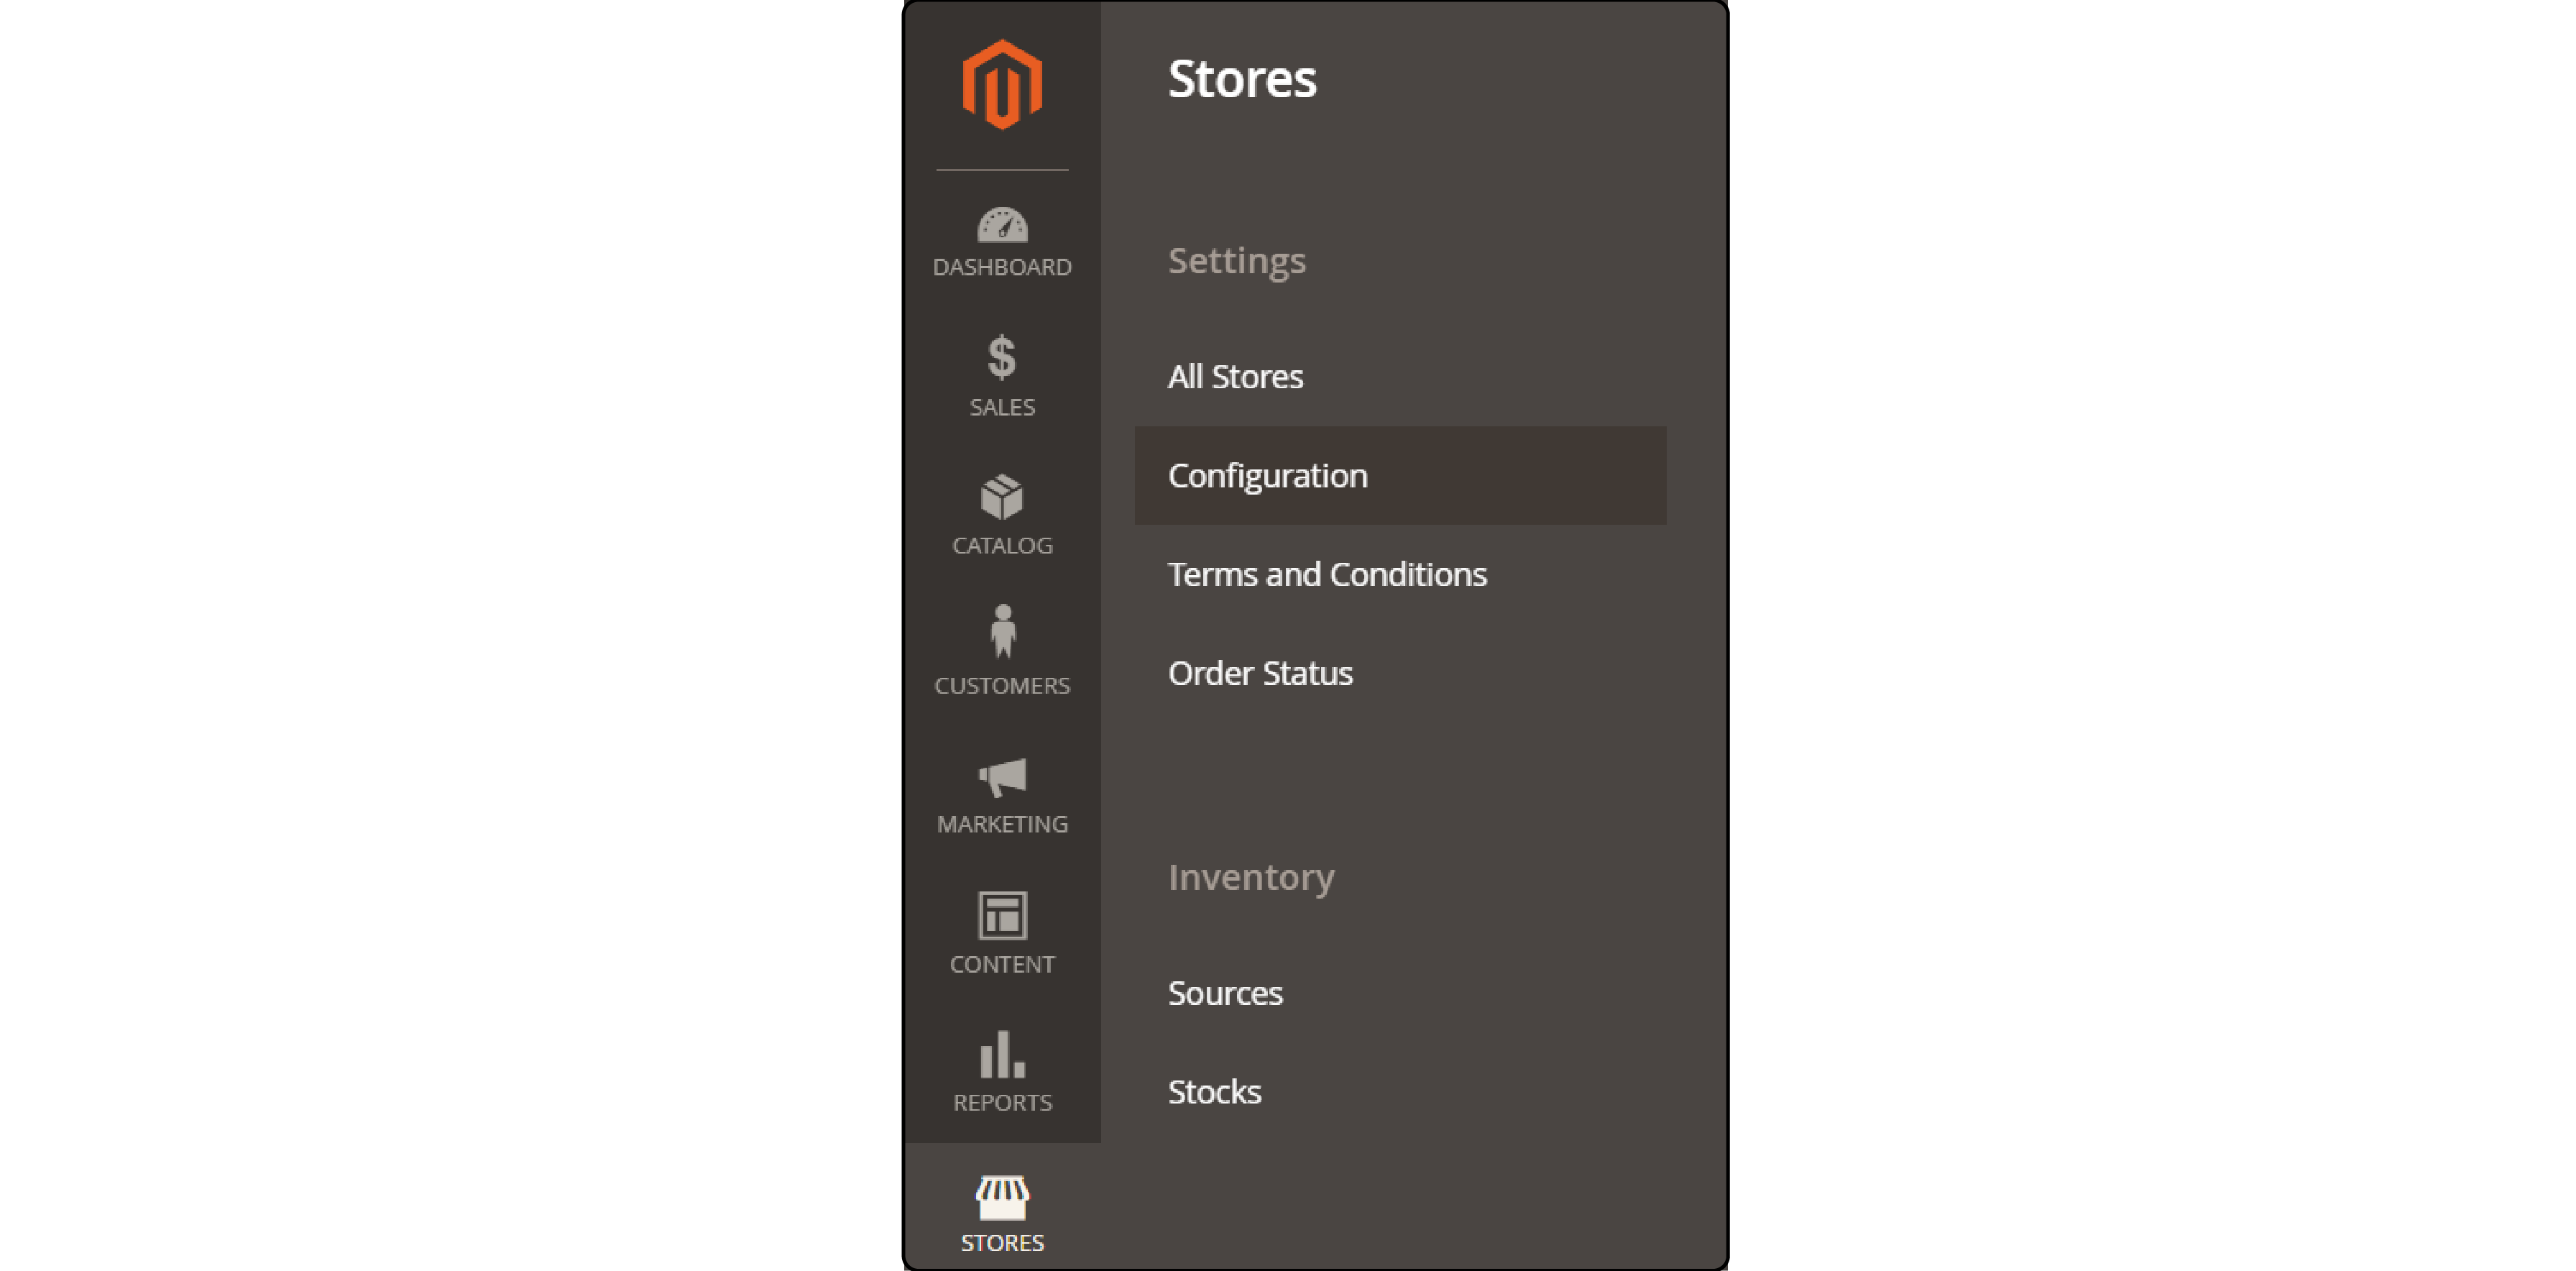 Navigating the configuration options in Magento 2 Admin for RSS feed settings